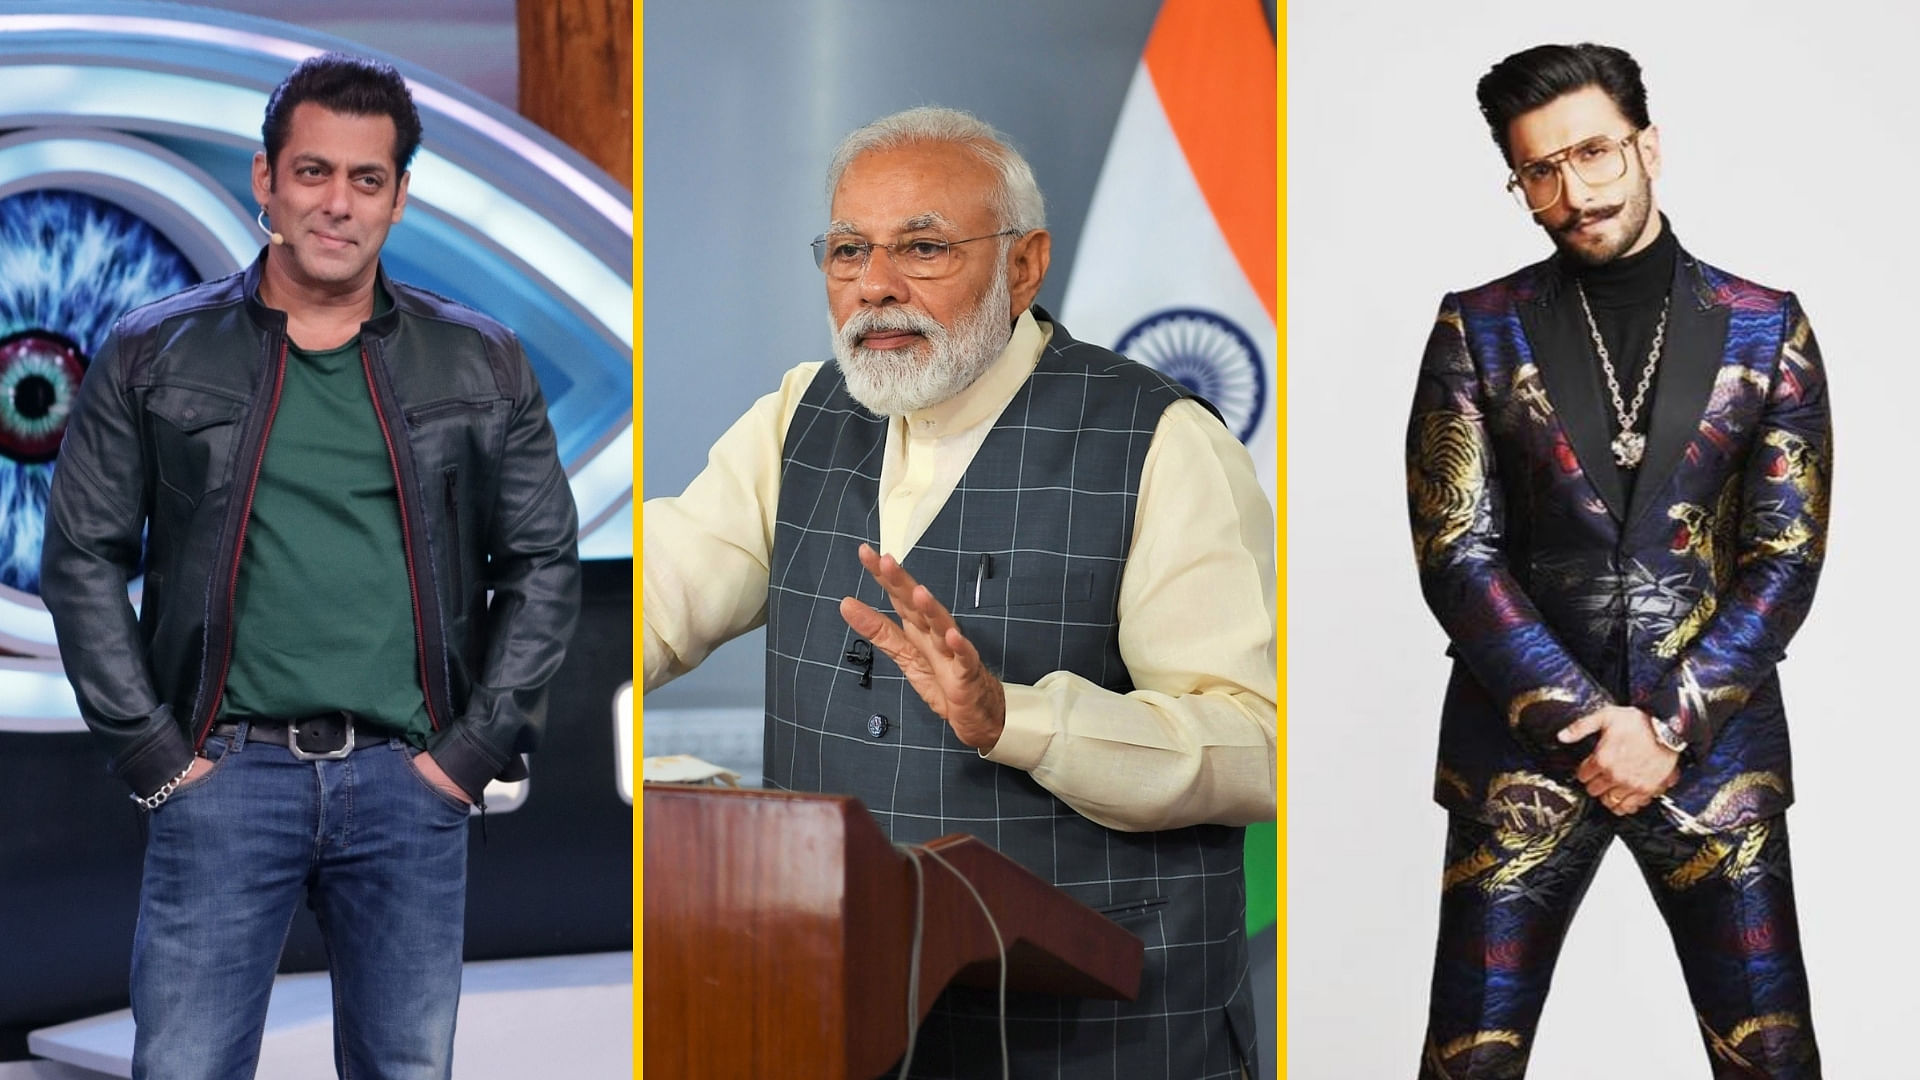 PM Modi has appealed to Bollywood celebs like Ranveer Singh and Salman Khan to encourage their fans to vote.